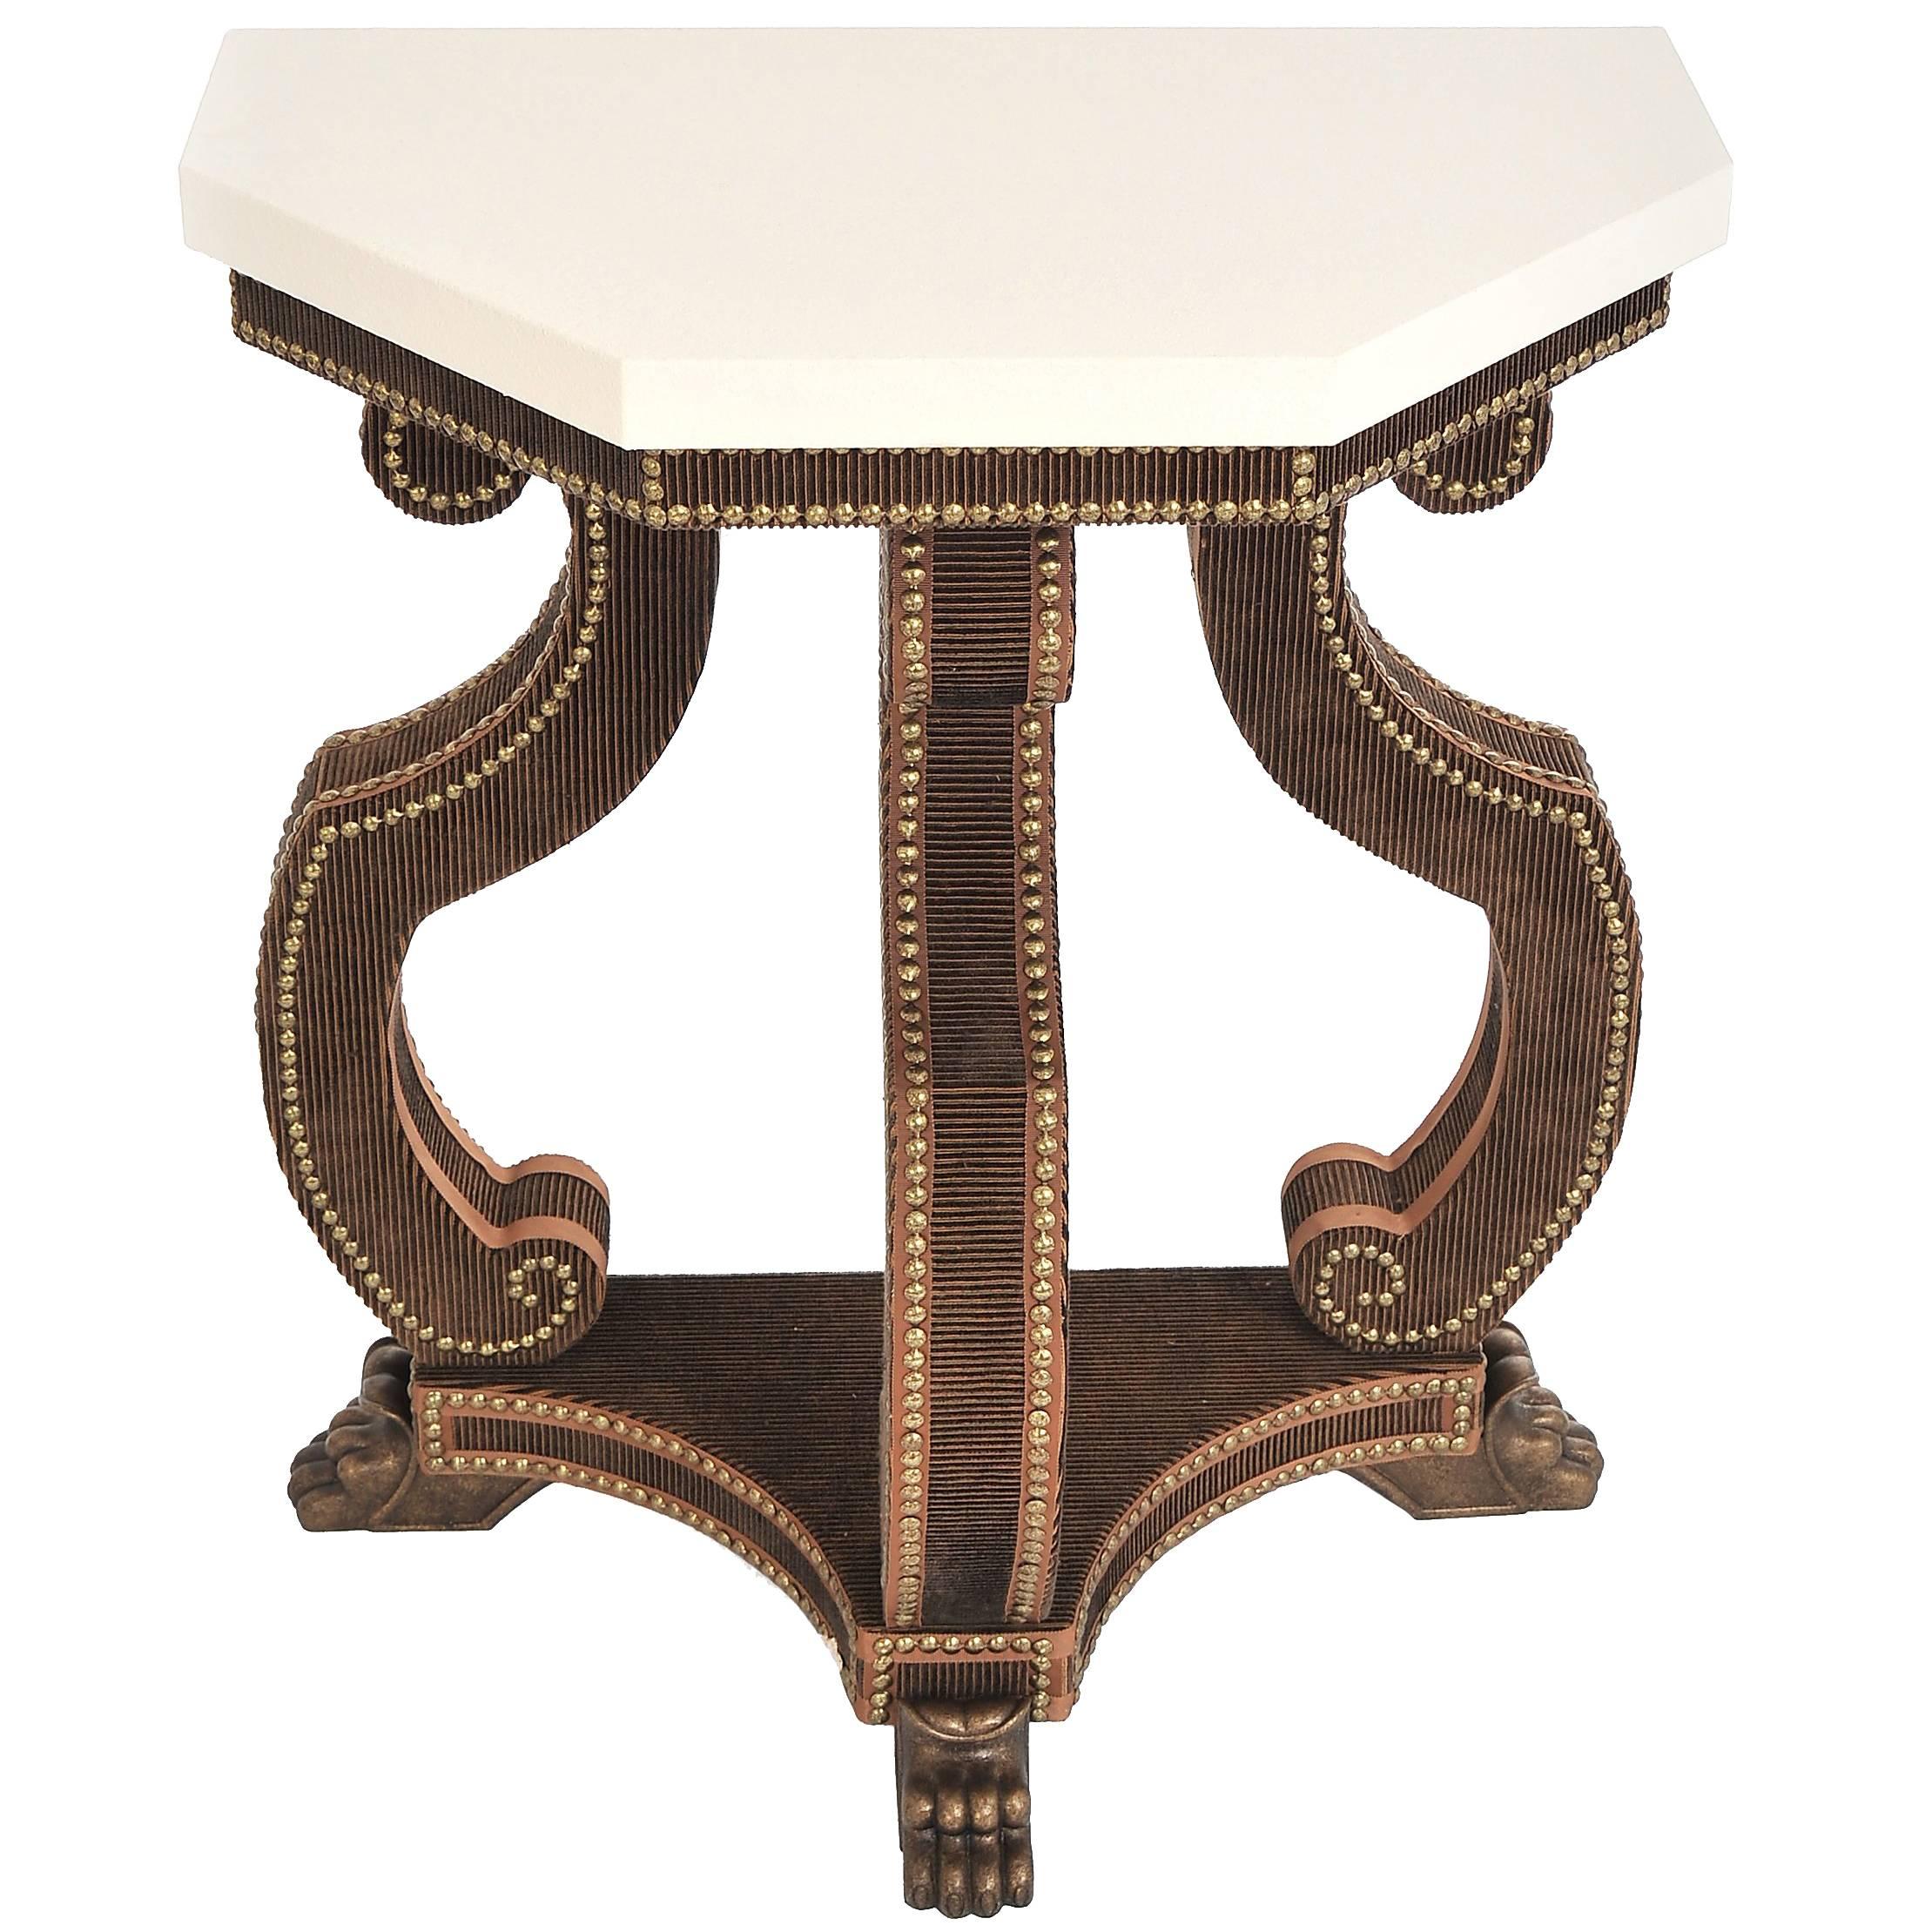 The Antonius demilune console table shown here in hand studded velvet with limestone top, is part of the velvet furniture collection designed by Alidad Ltd and Thomas Messel and based on Baroque and neoclassical shapes. It can be customized in a